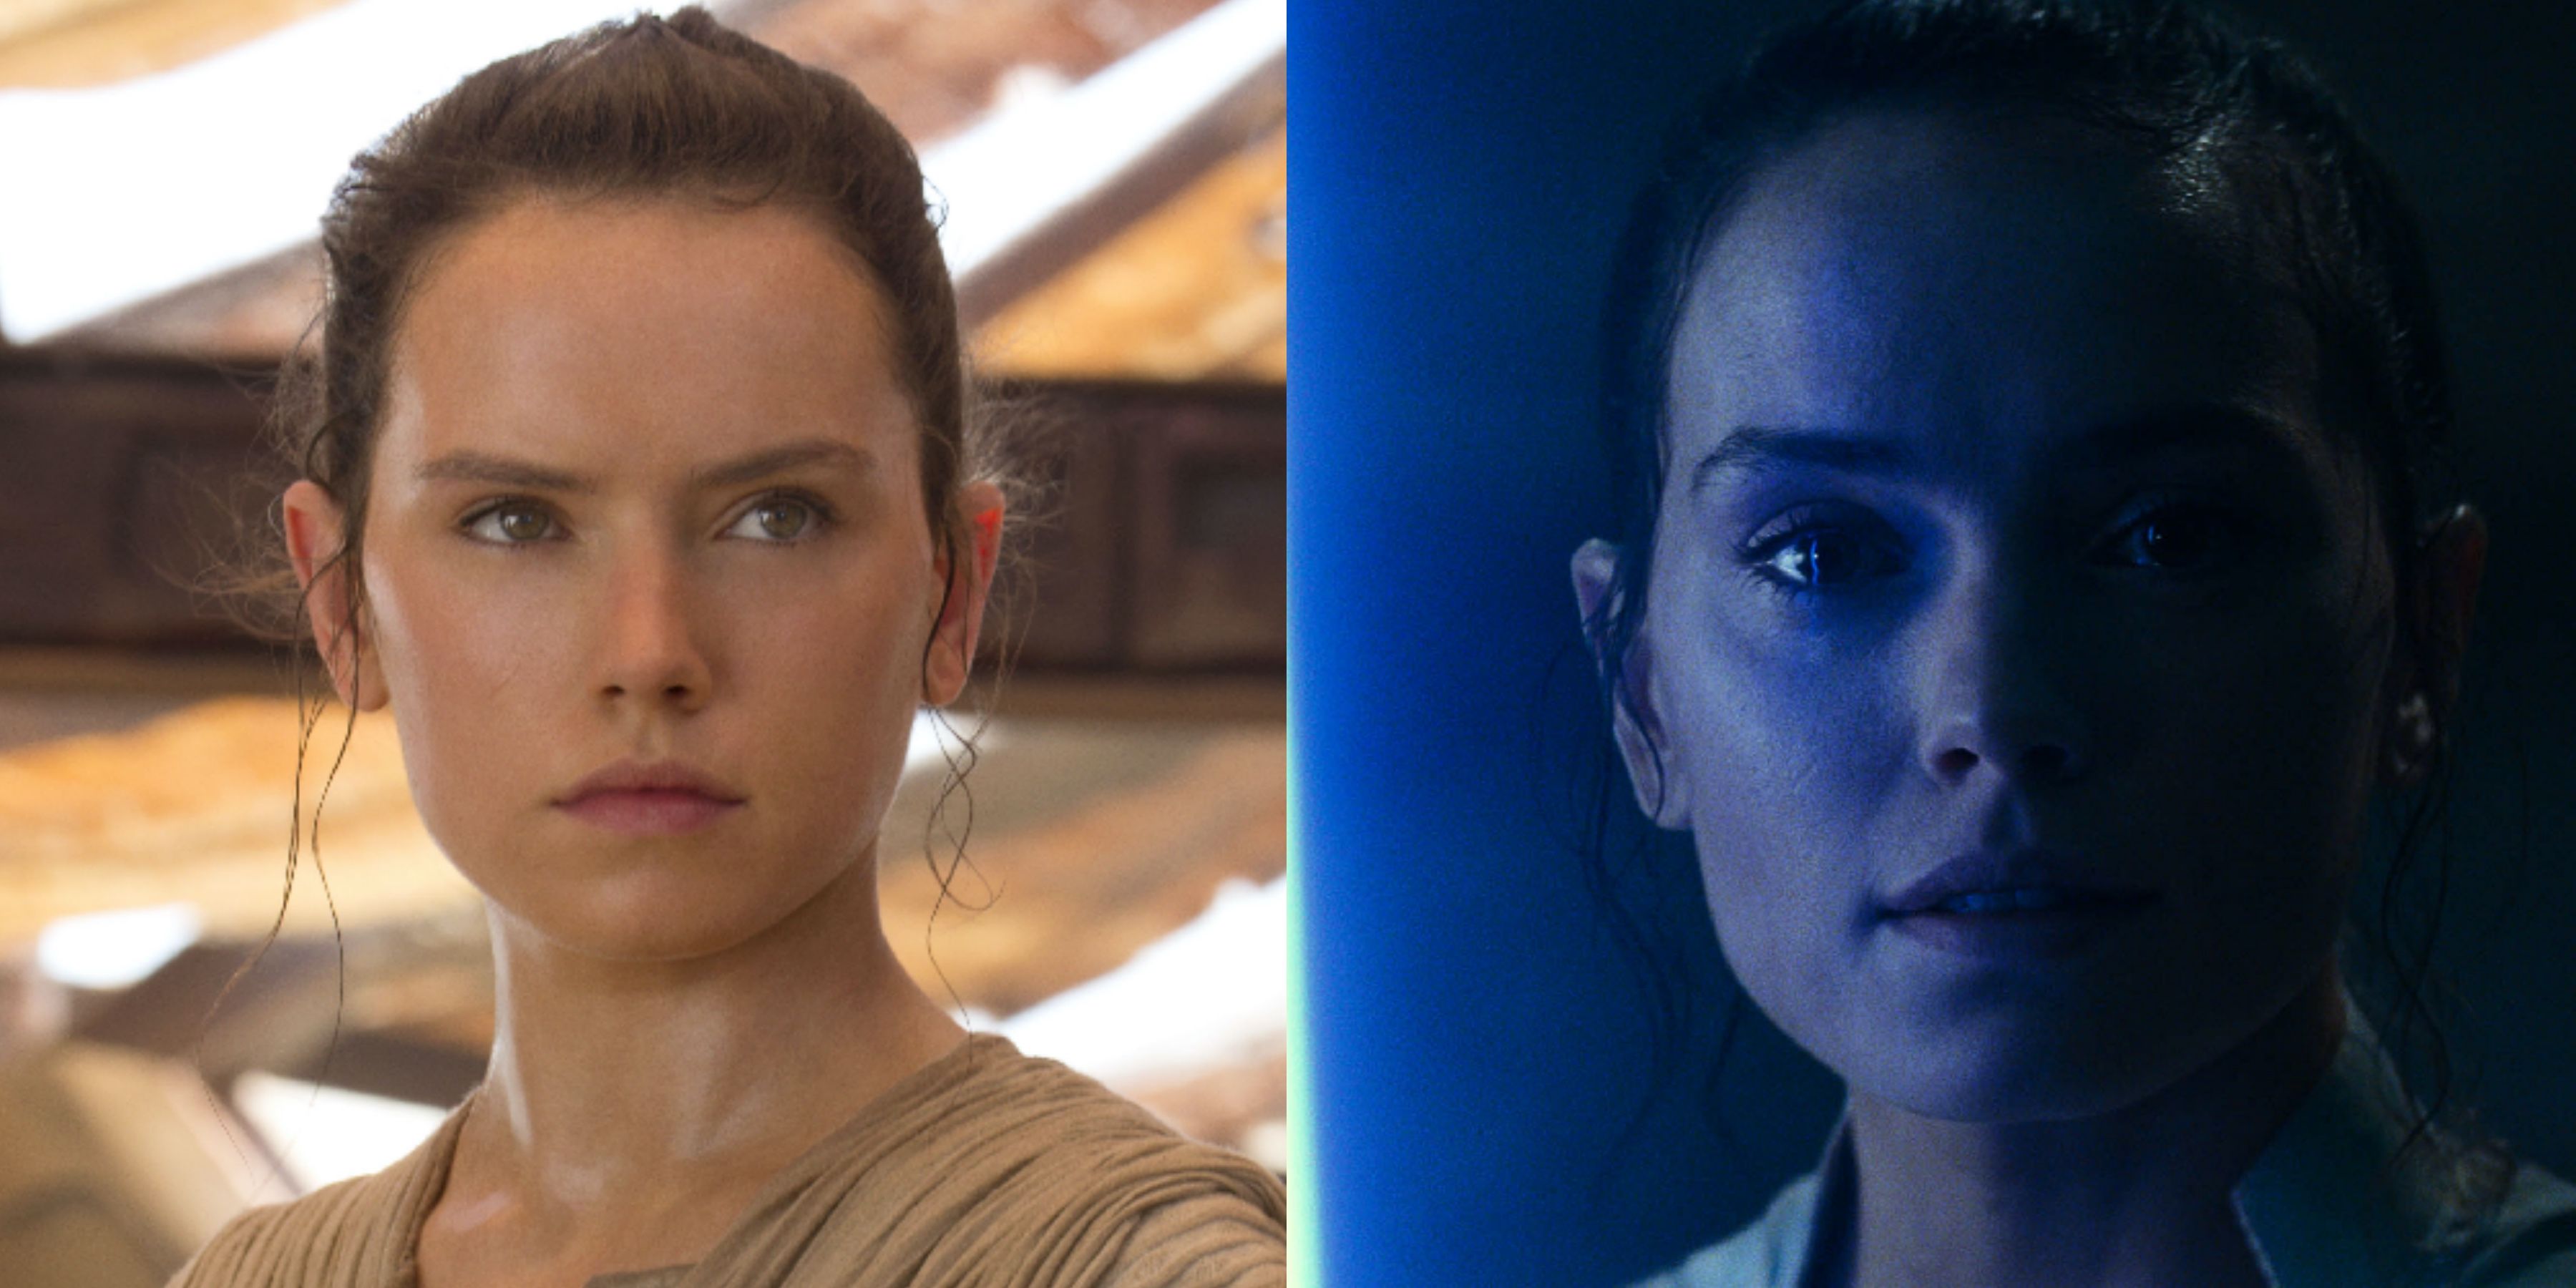 Star Wars The Rise of Skywalker: Who were the Jedi voices? (Spoilers)